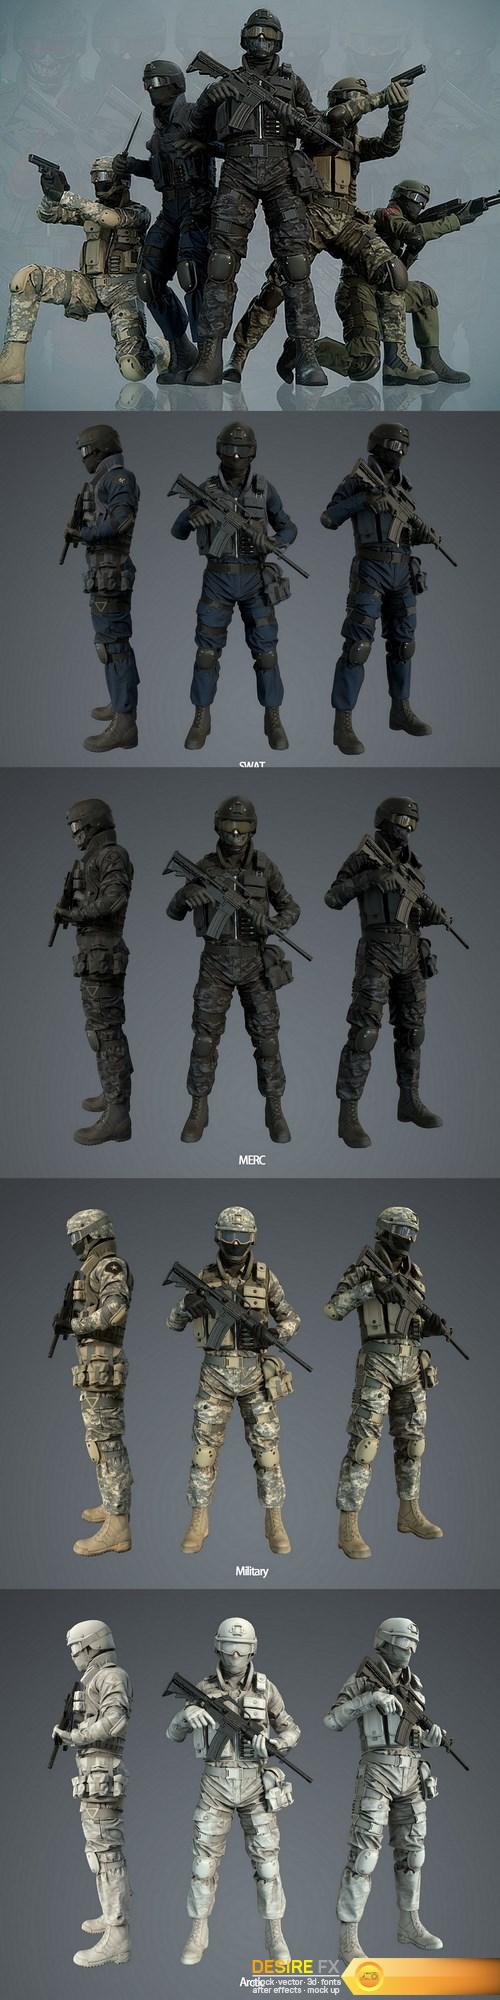 Cubebrush - Assault Character Pack Remastered